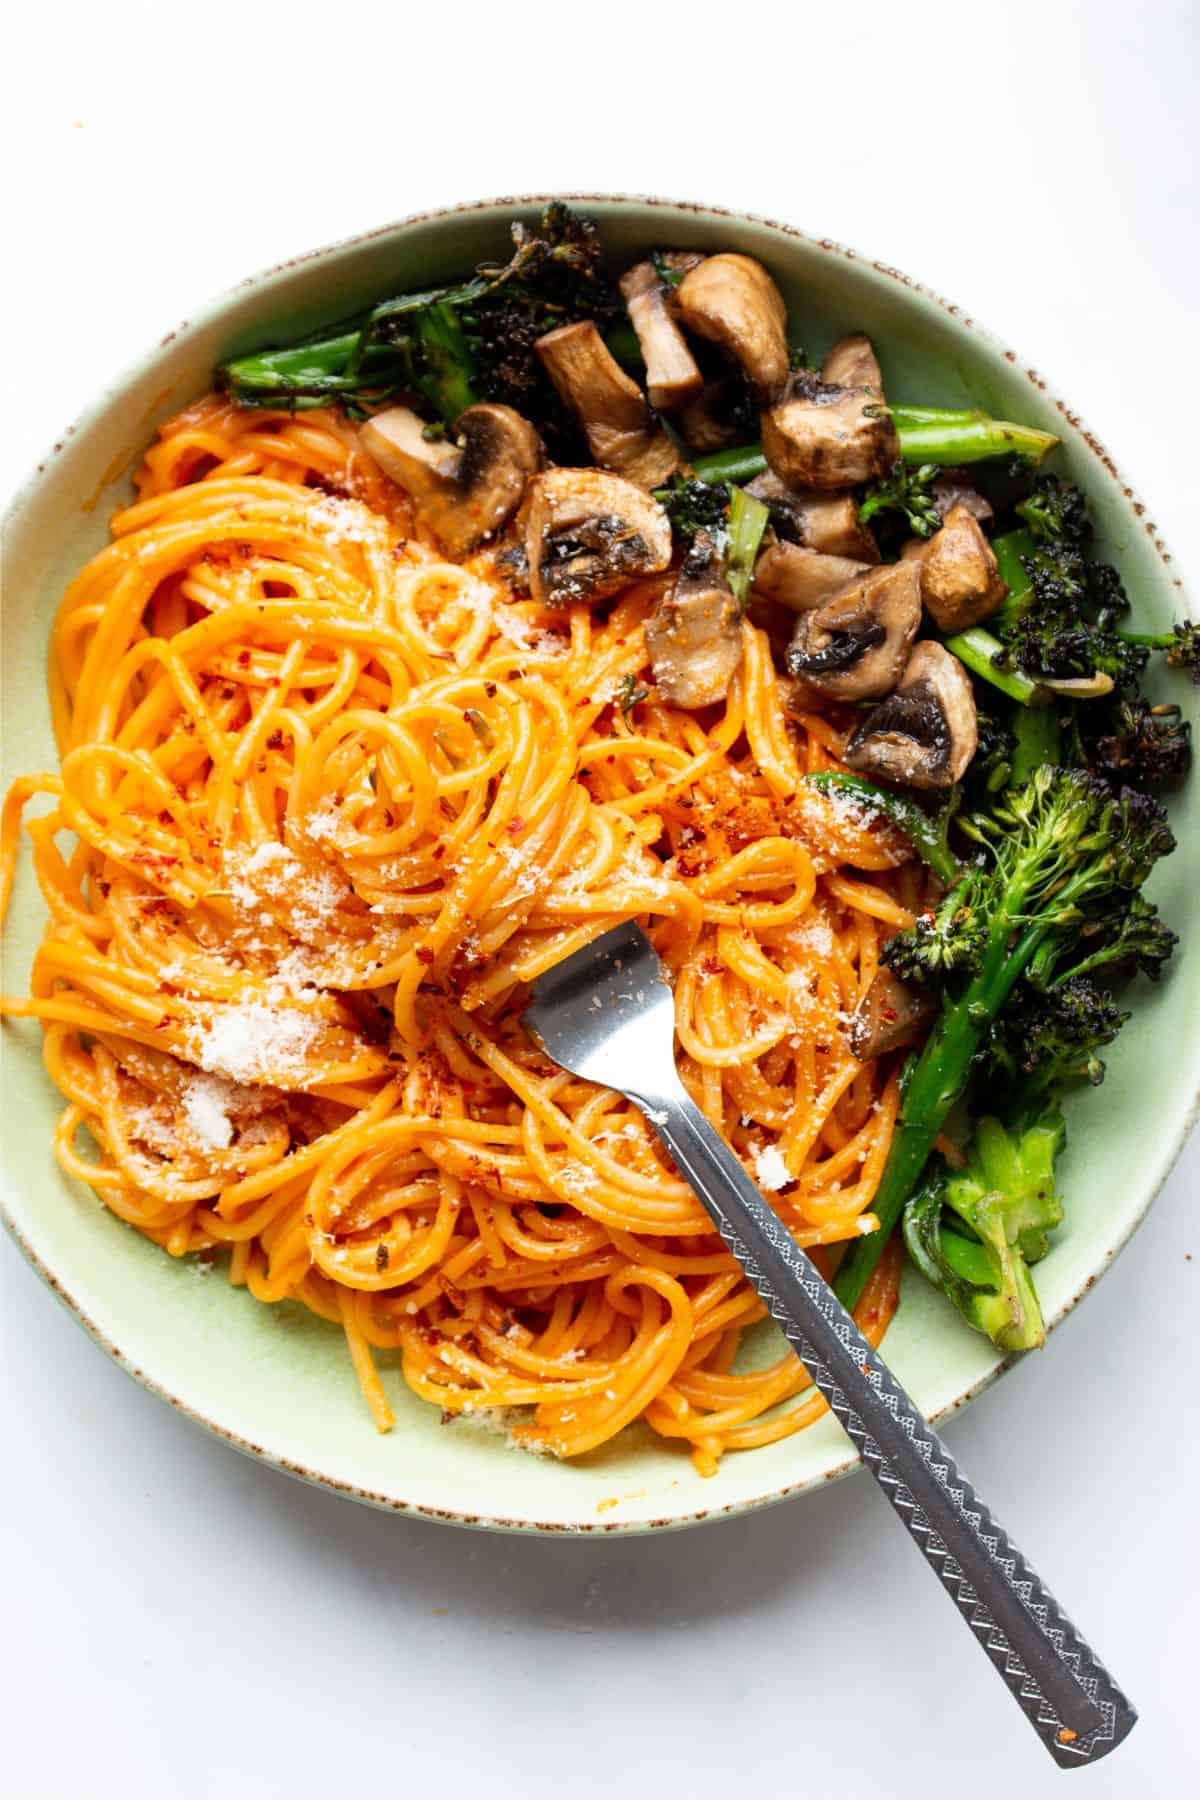 Tomatoey pasta topped with parmesan in a bowl with mushrooms and broccoli.